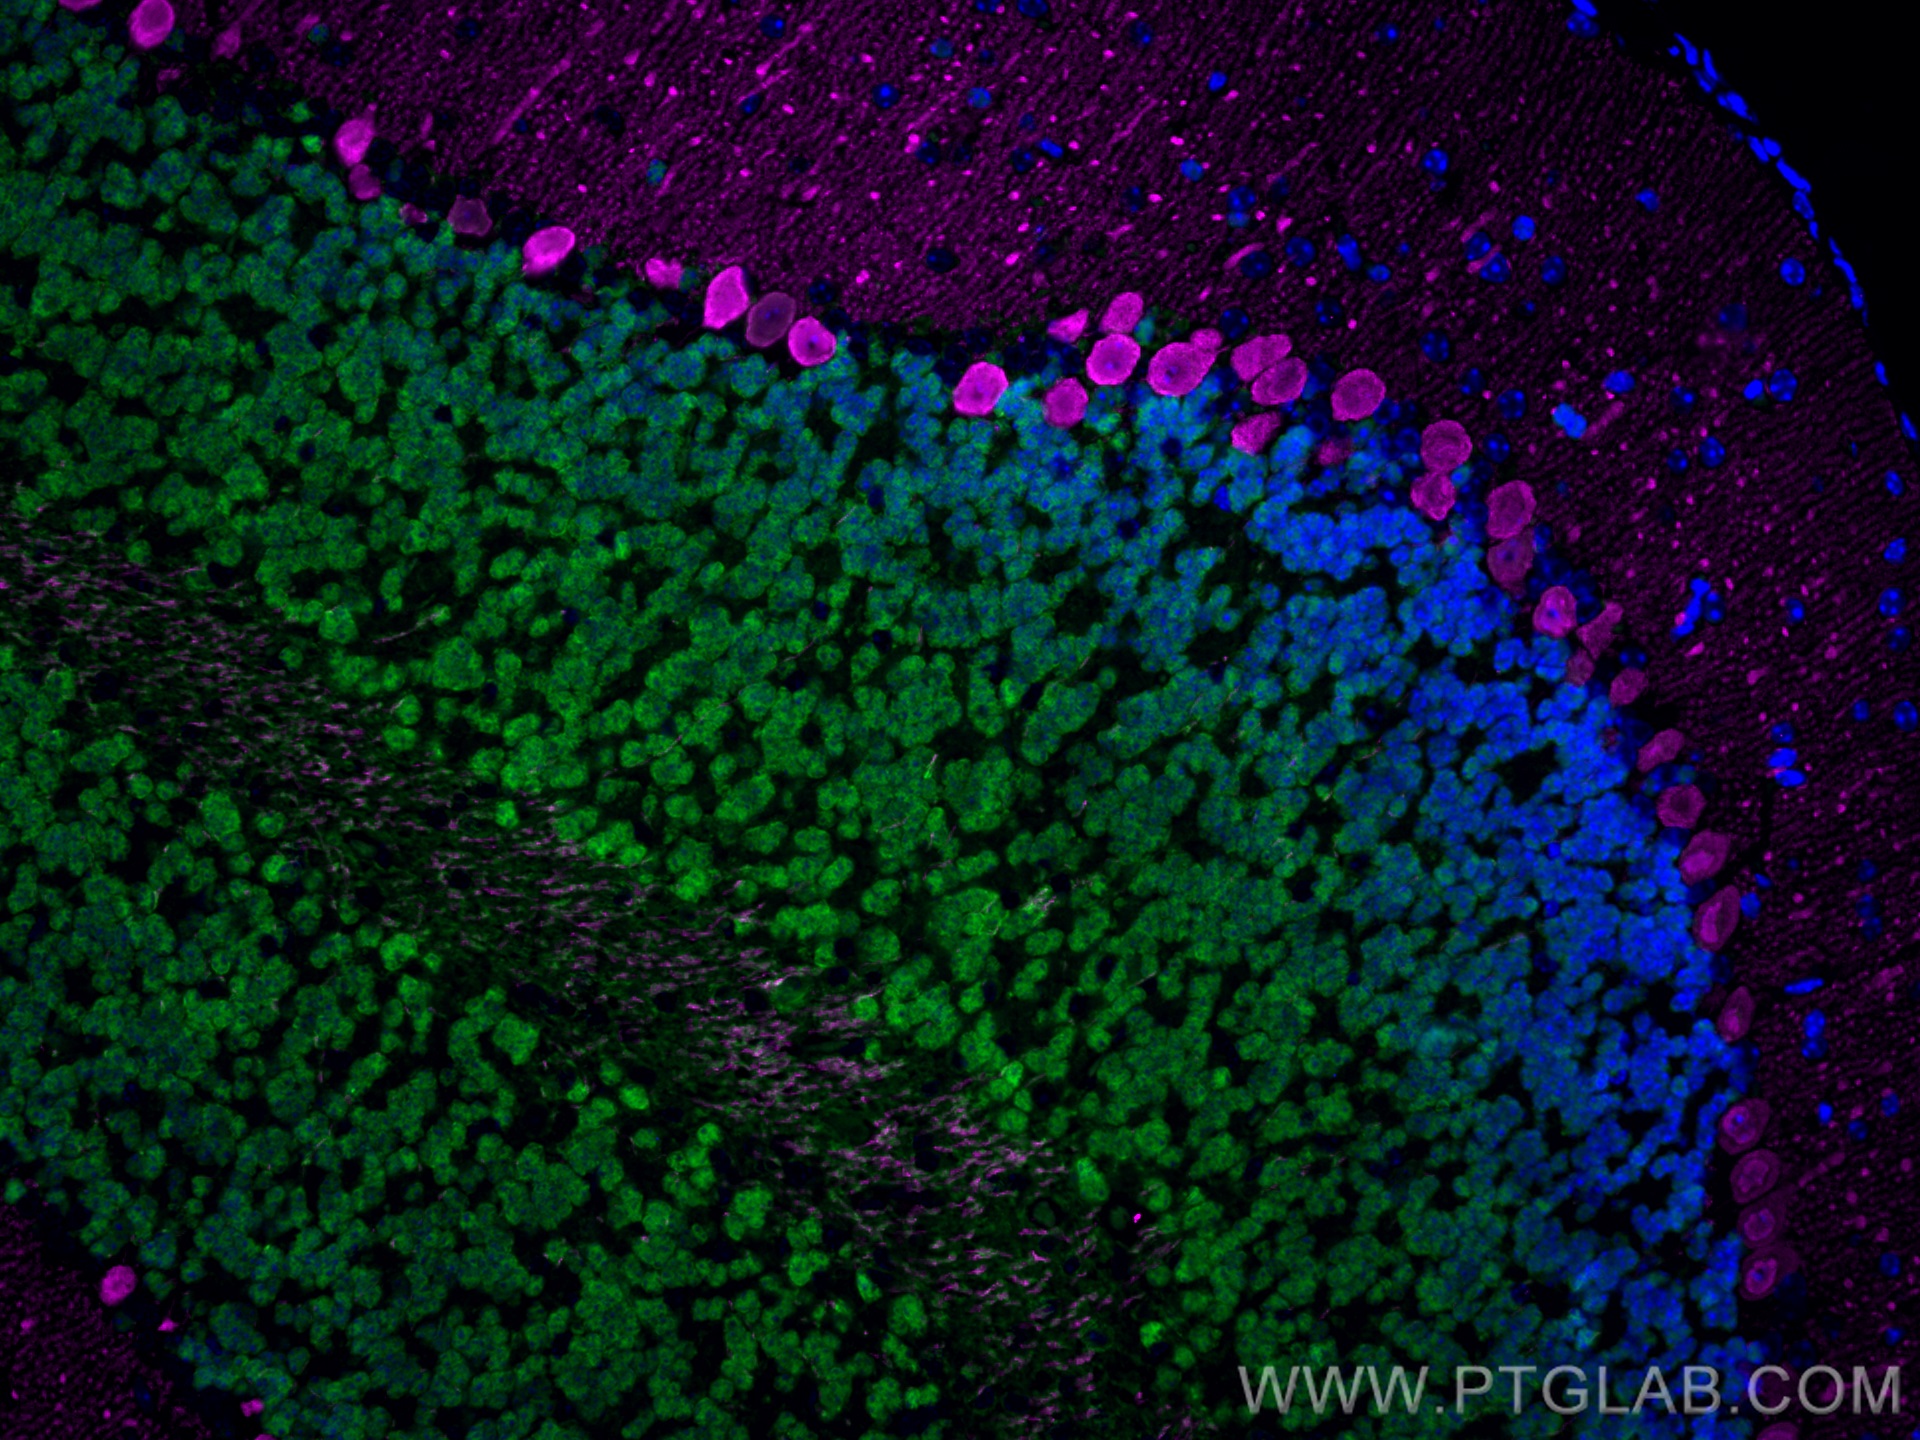 Immunofluorescence of mouse cerebellum: mouse cerebellum FFPE section was stained with Rabbit anti-NeuN polyclonal antibody (26975-1-AP, 1:200, green) and mouse anti-Calbindin-D28k monoclonal antibody (66394-1-Ig, 1:200, magenta). Multi-rAb CoraLite® Plus 488 conjugated Recombinant Goat anti-rabbit secondary antibody (RGAR002, 1:500) and Multi-rAb CoraLite® Plus 647 conjugated Goat Anti-Mouse Recombinant Secondary Antibody (H+L) were used for detection (RGAM005, 1:500) . 